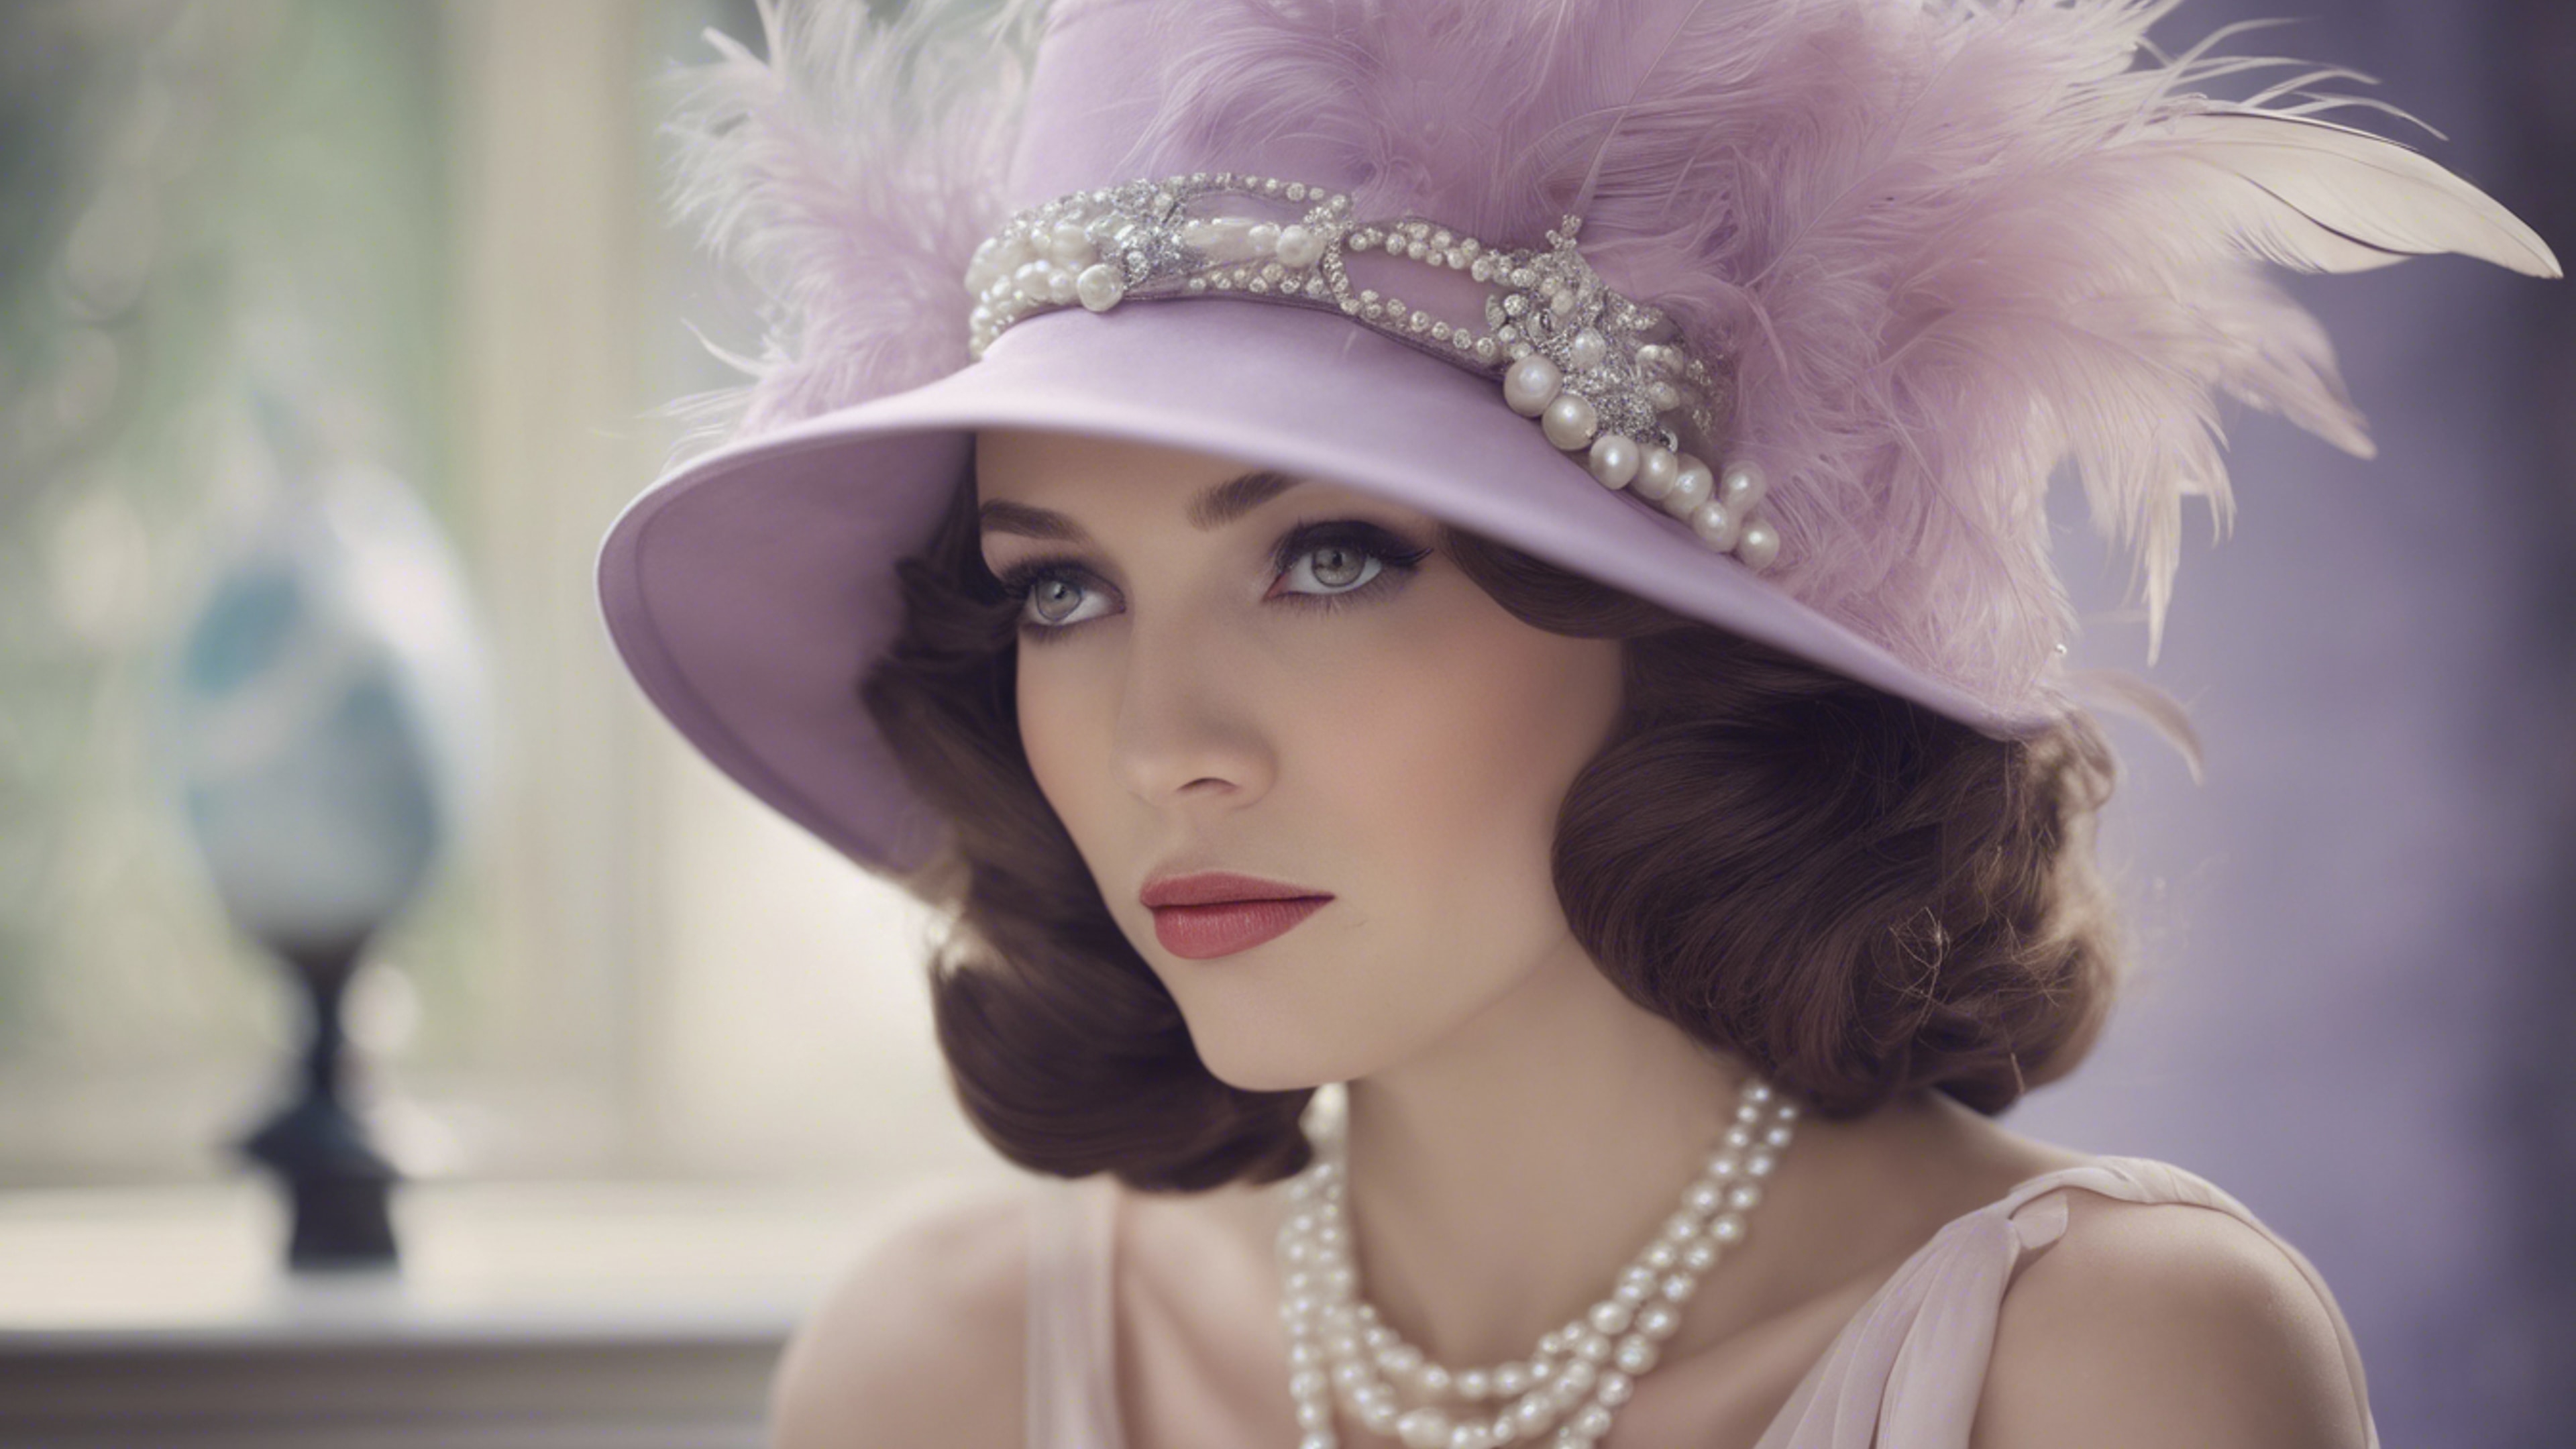 An elegant pastel purple hat adorned with feathers and pearls, typical of 1920’s fashion.壁紙[175d38ecde9e405fb27c]